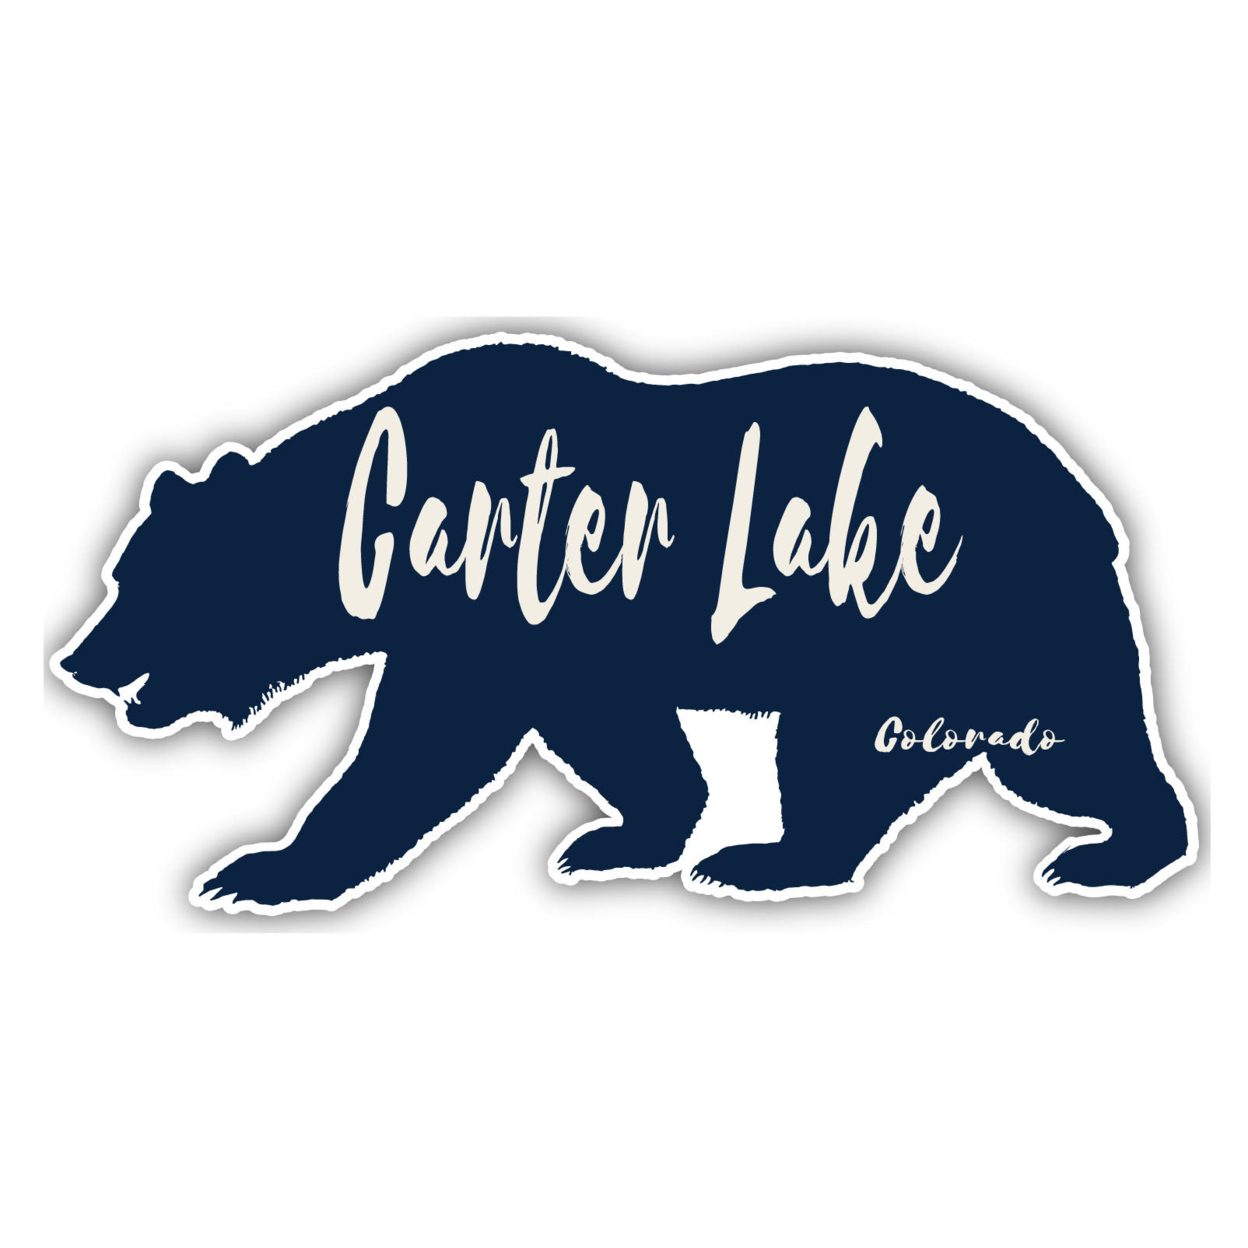 Carter Lake Colorado Souvenir Decorative Stickers (Choose Theme And Size) - 4-Pack, 2-Inch, Camp Life